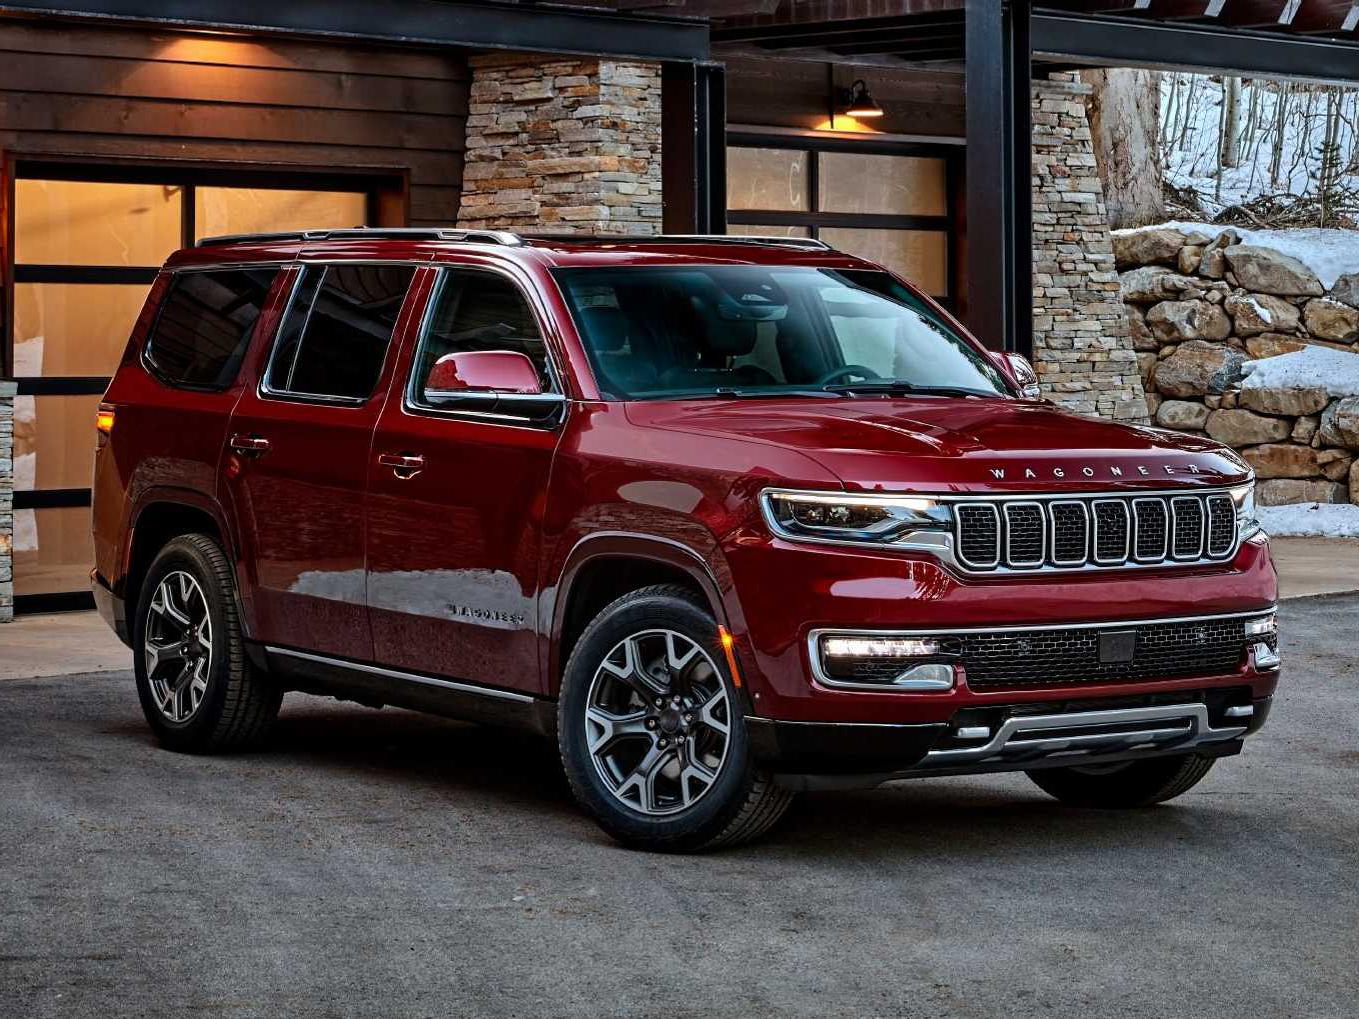 The 2022 Jeep Wagoneer and Grand Wagoneer have been added to the Stellantis lineup.